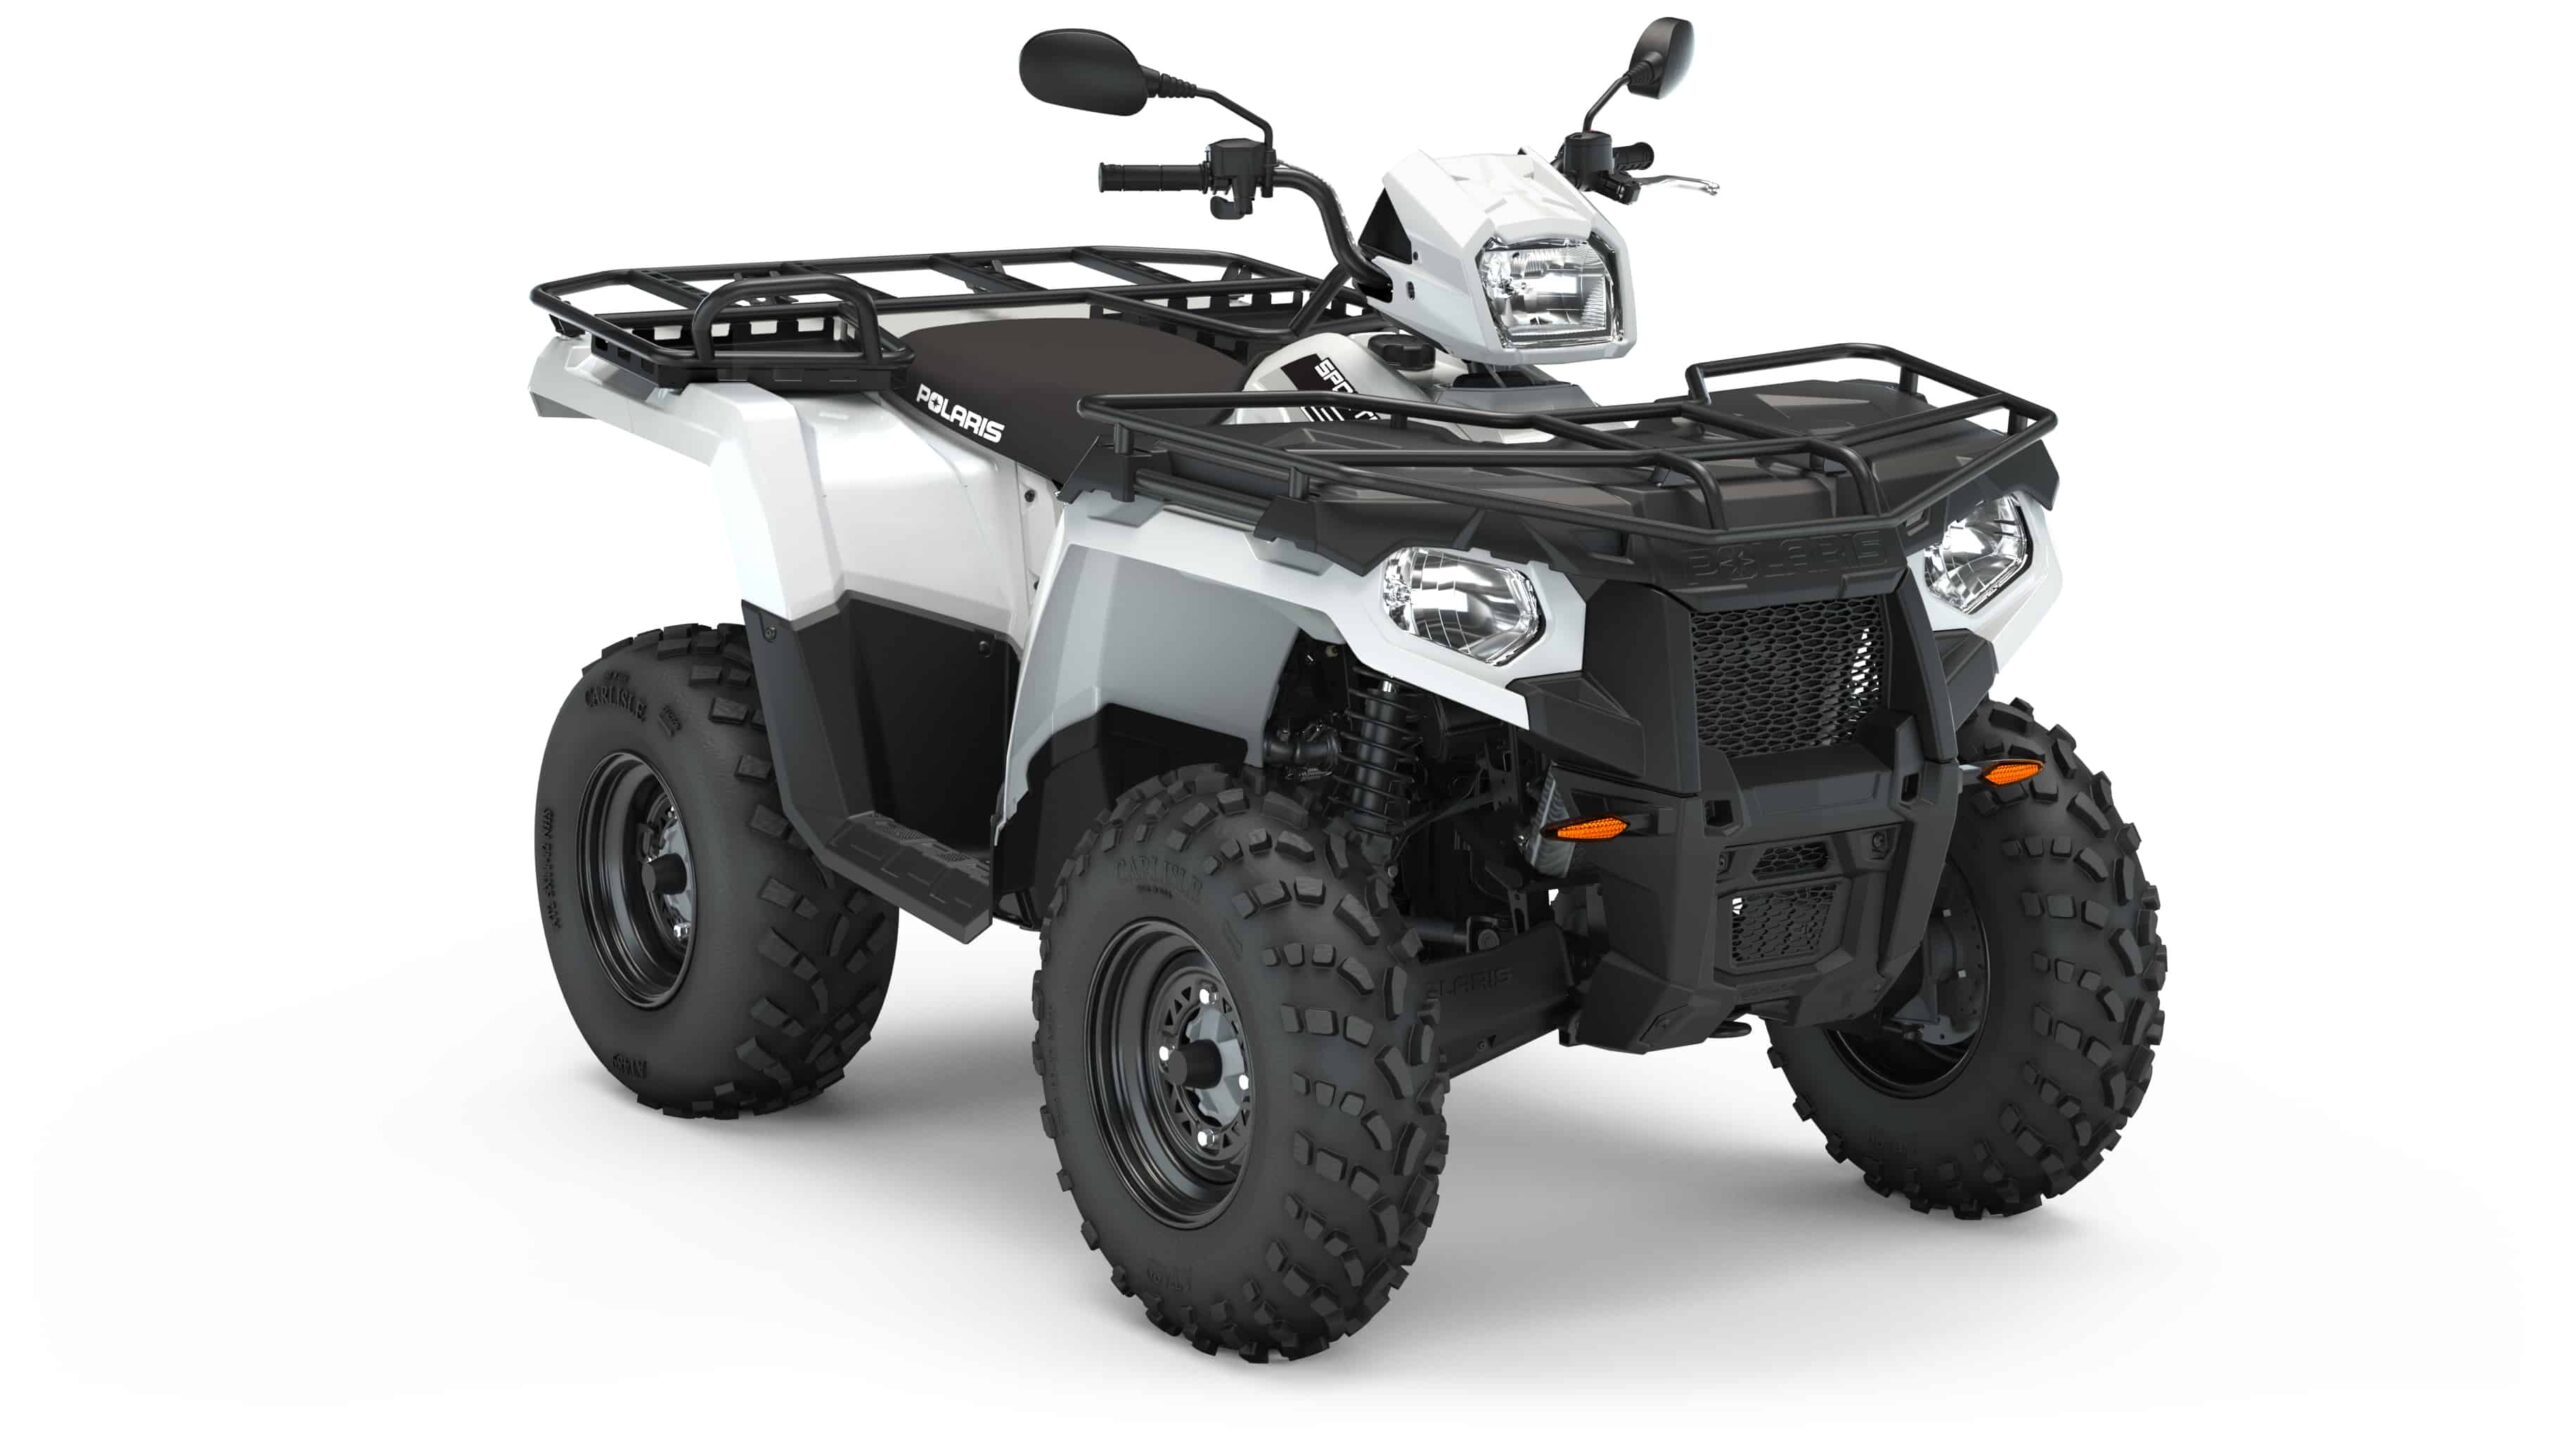 New special edition Sportsman models for 2019